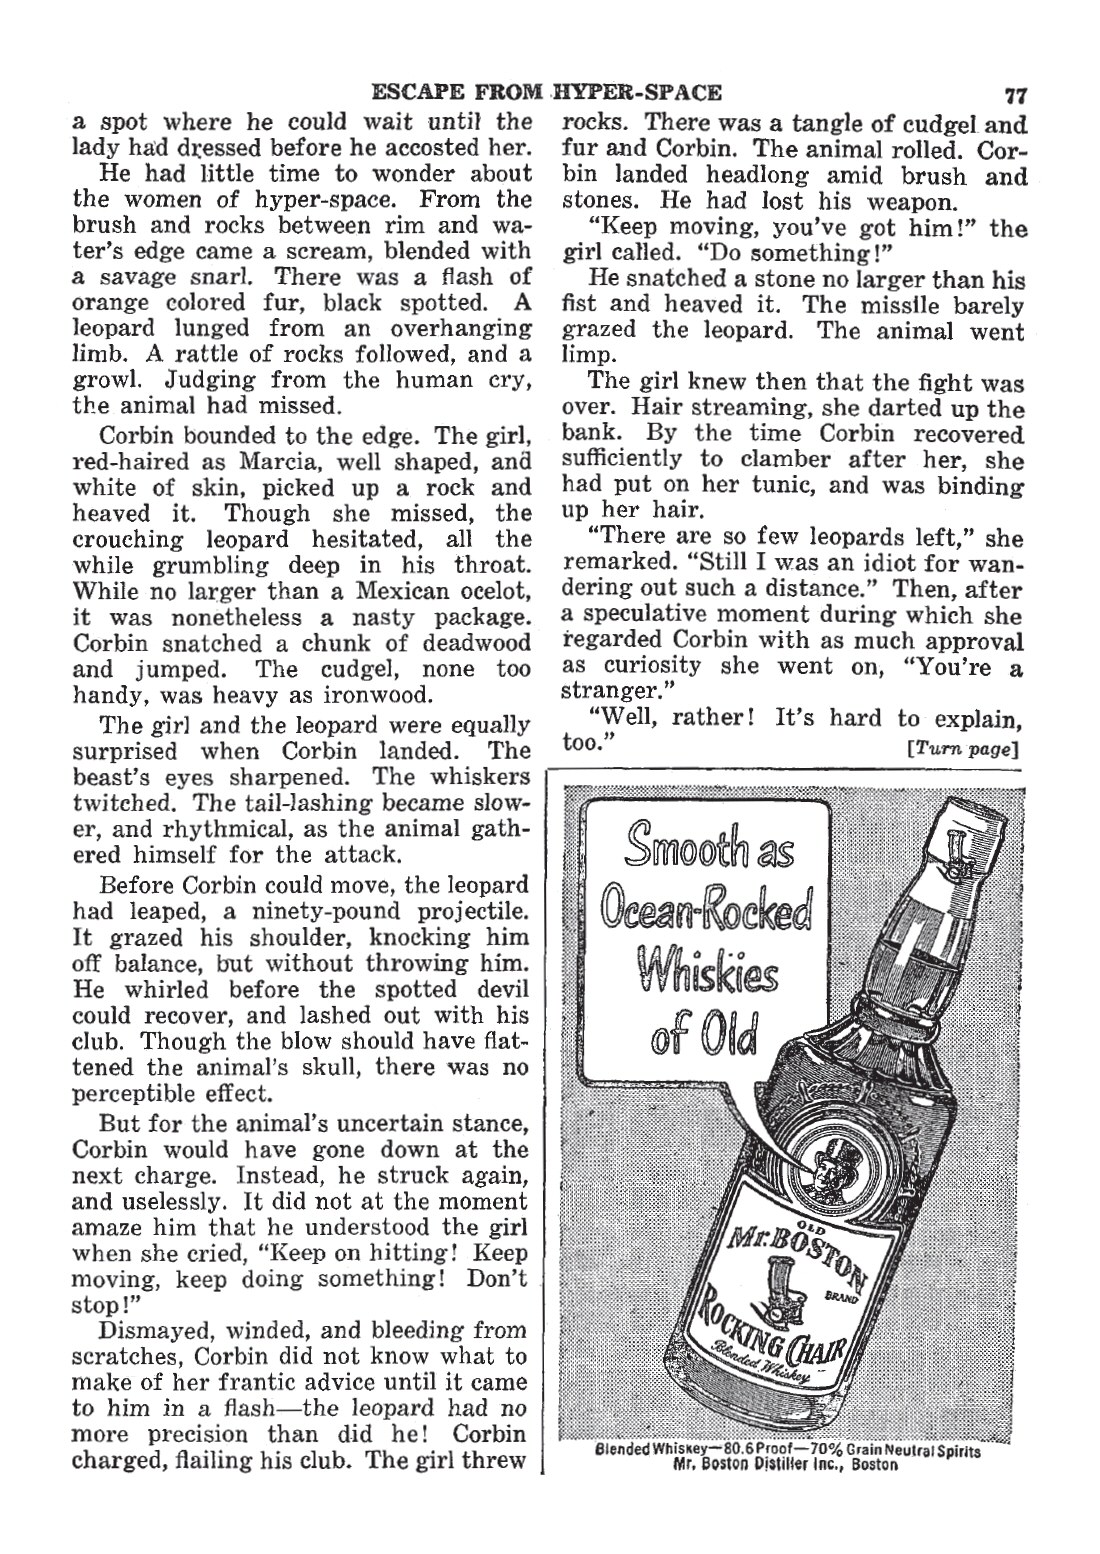 an article on alcohol, which has been written in english